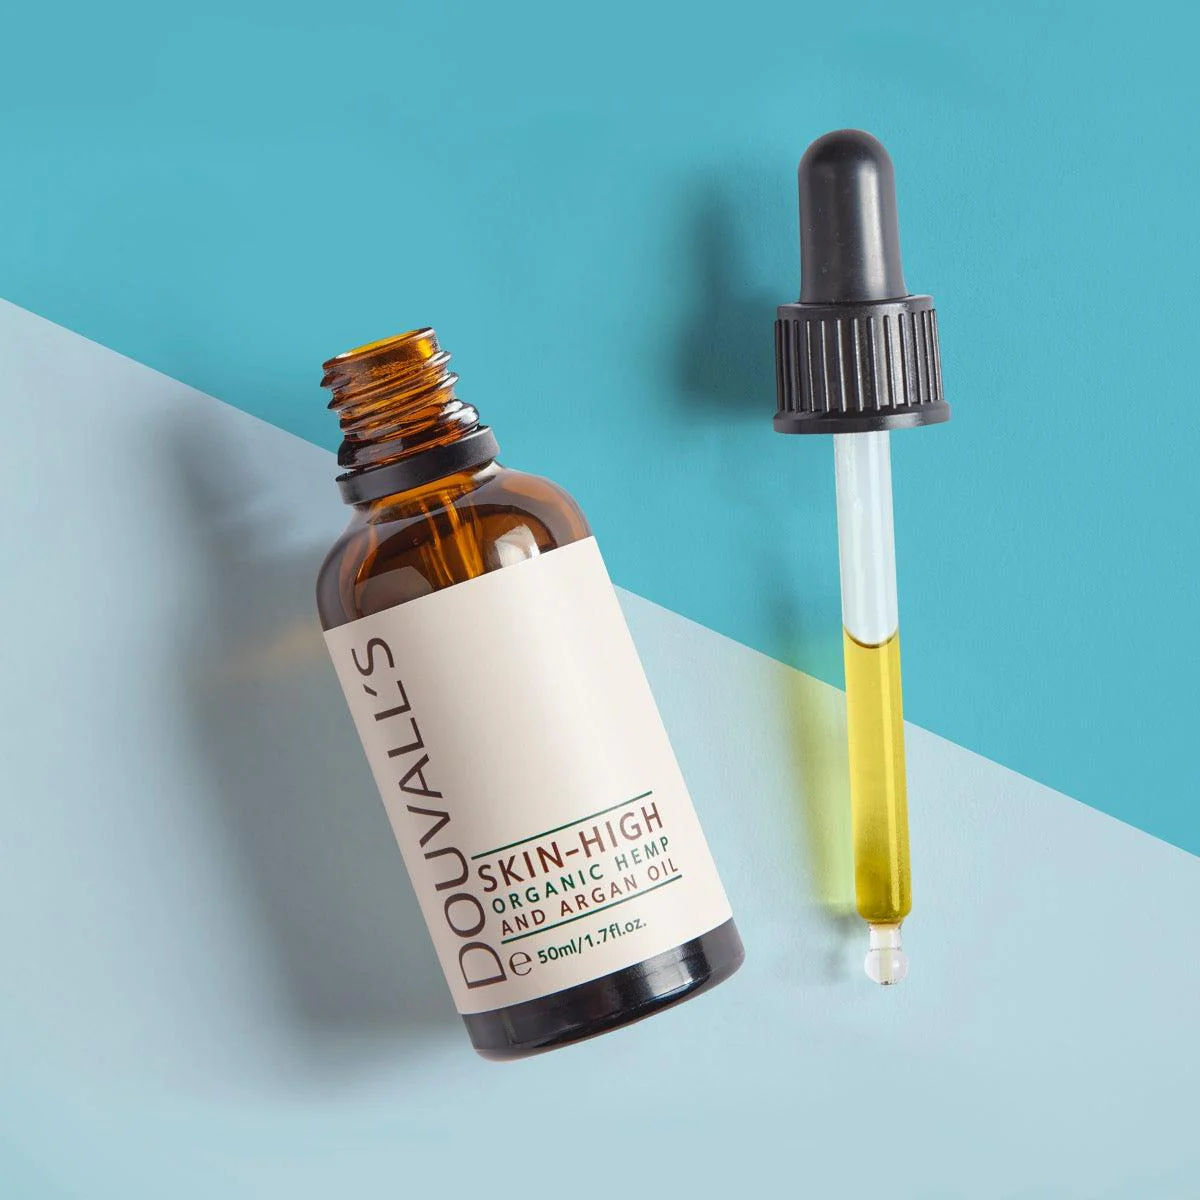 Skin-High Hemp and Argan oil 50ml | The Ultimate Powerhouse for Stronger, Glowing Skin